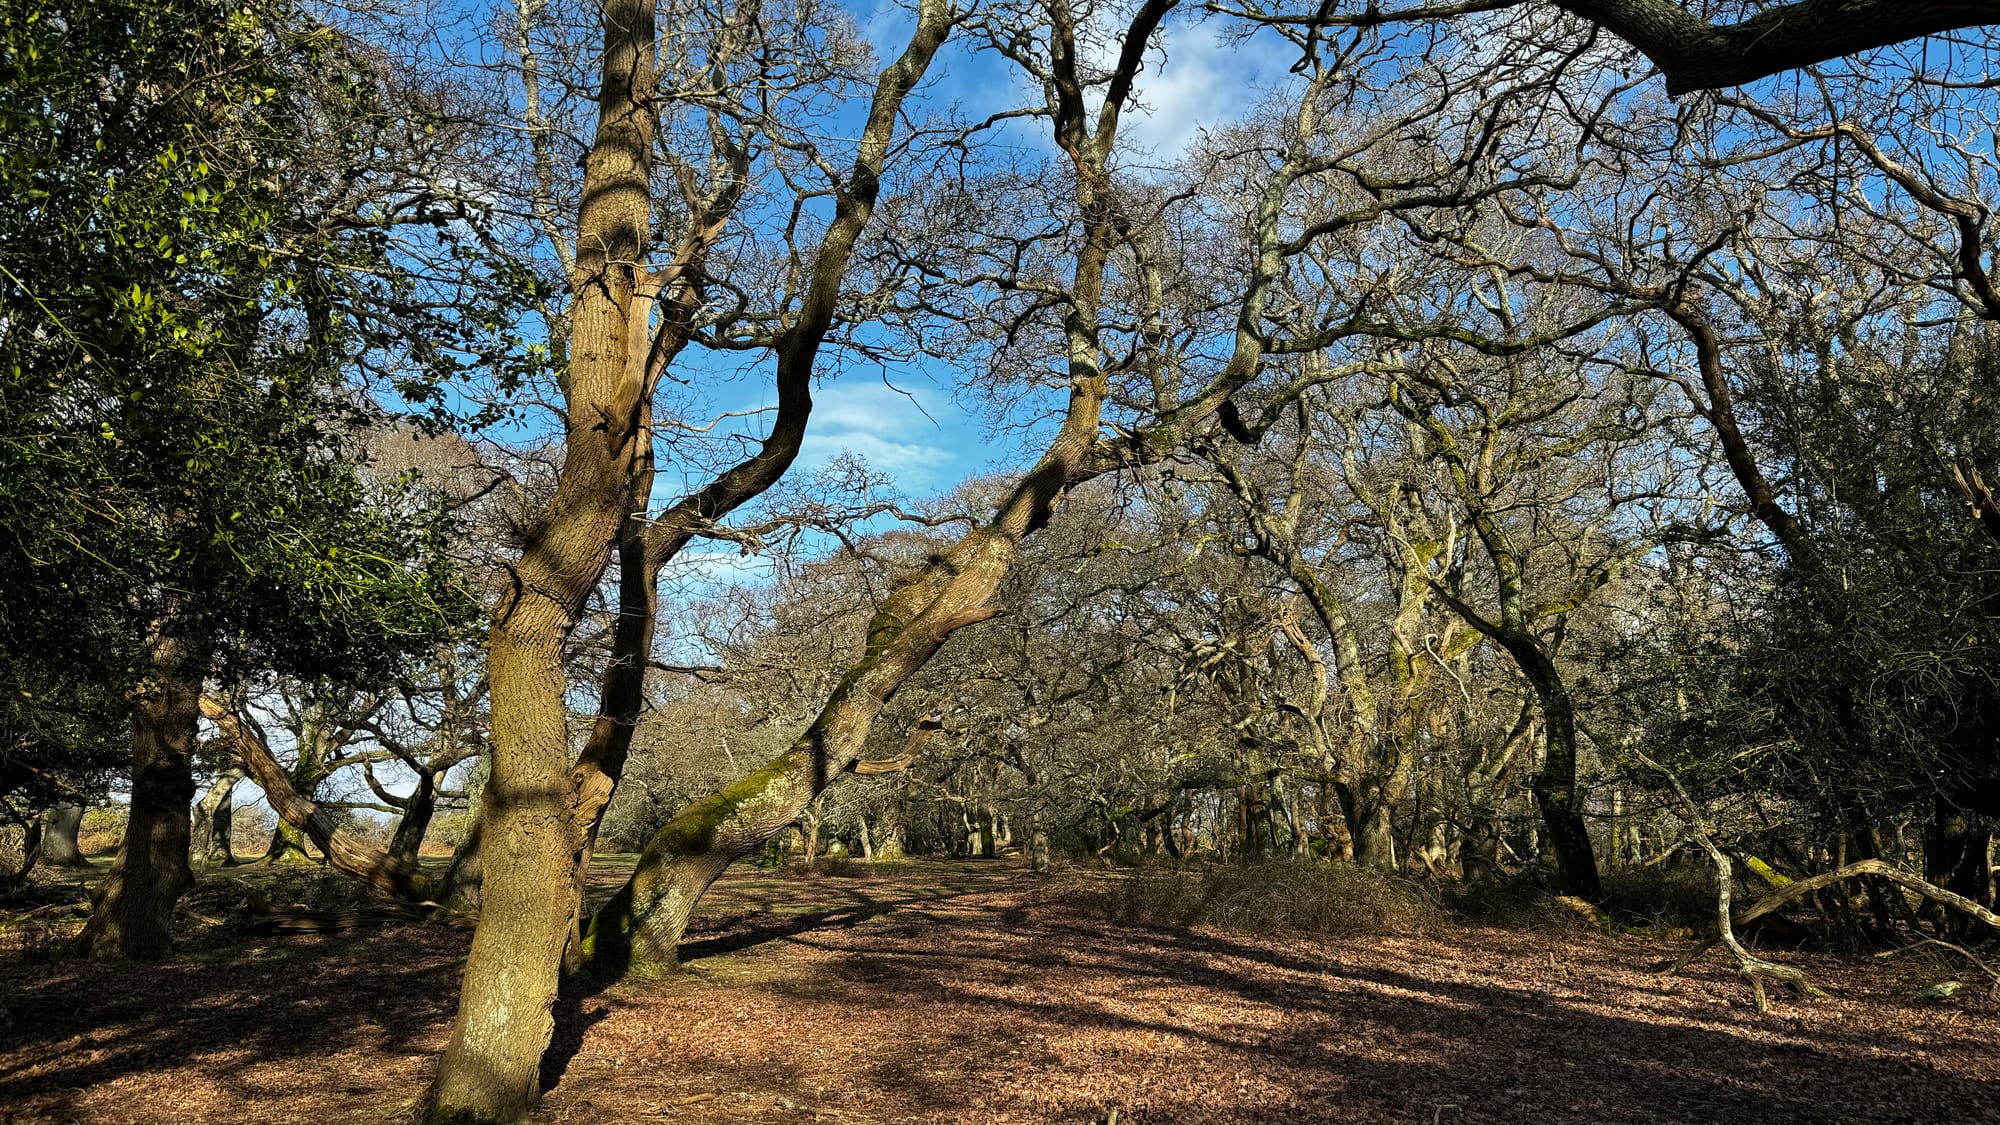 Week 182: In the mud of the New Forest